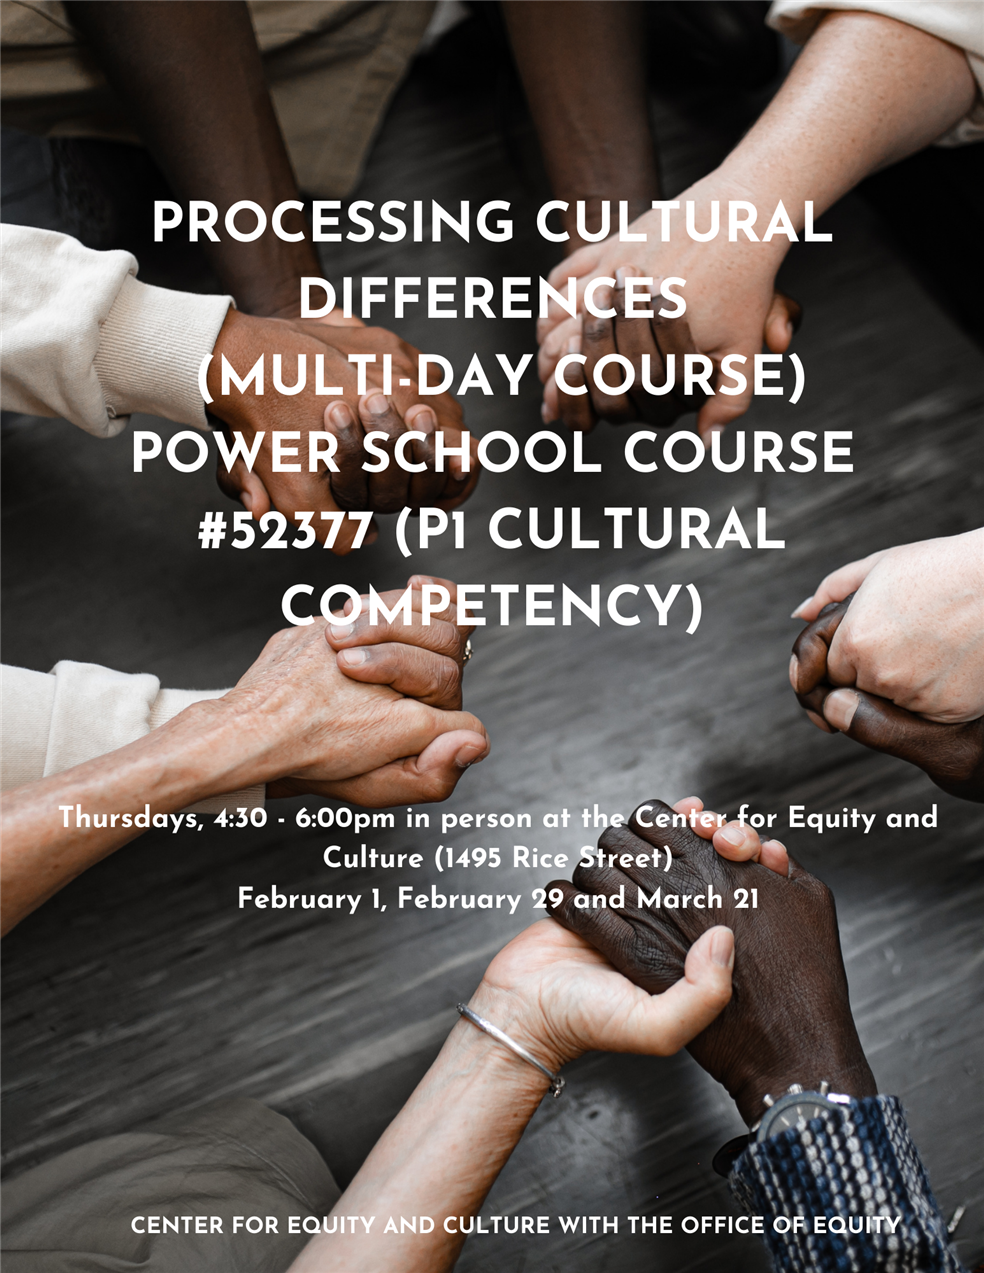 The Office of Equity is offering a new course in Processing Cultural Differences